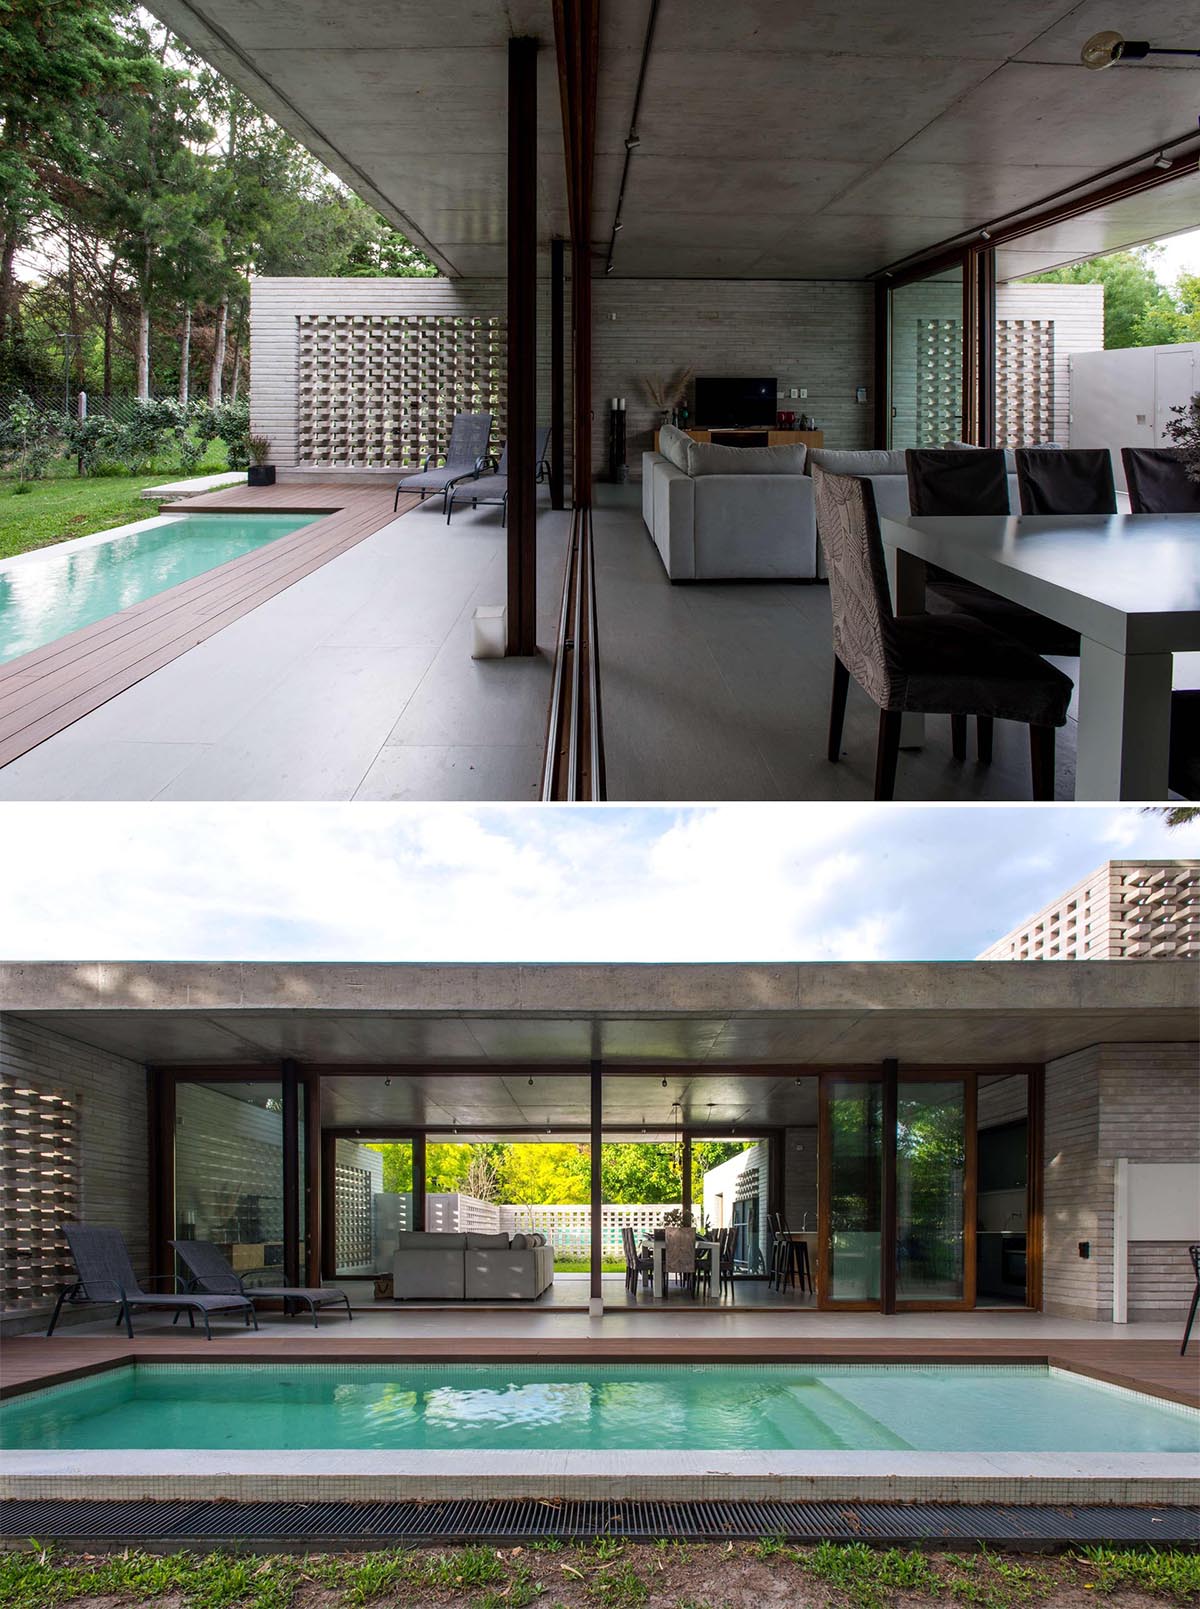 A modern concrete home with sliding glass walls and a swimming pool.